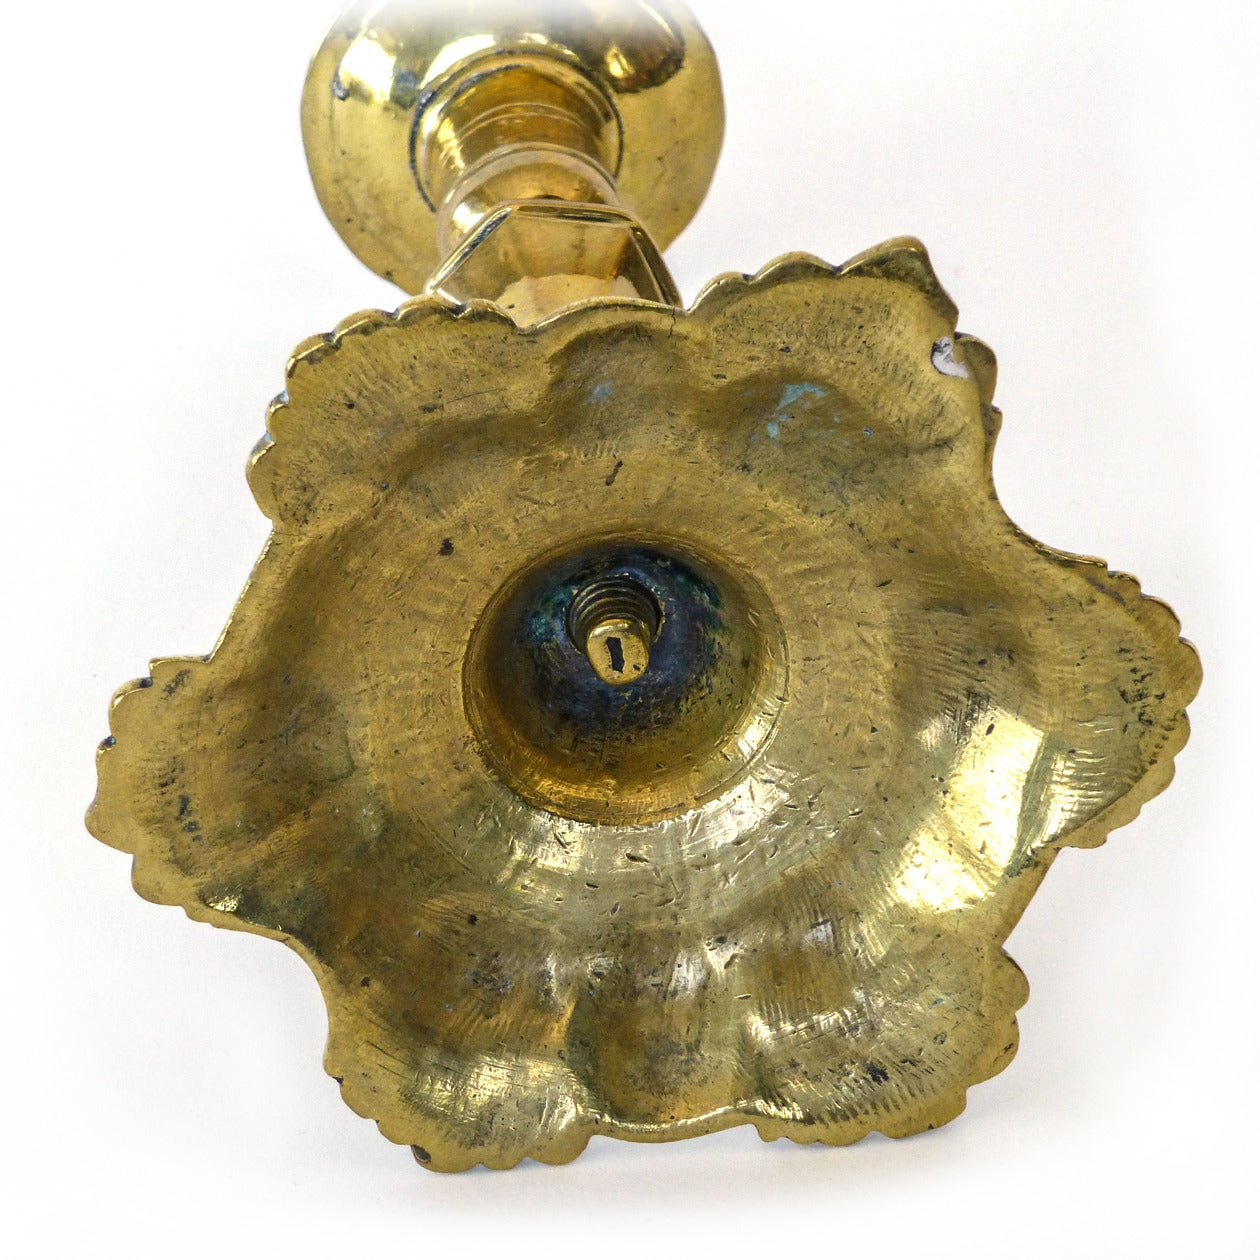 18th C. English/Dutch Brass Shell Base Candlestick Circa 1750
Great shell base. Unusual Construction. Shaft is core cast, screws into base. Bobeche sits on ledge, aperture spread to hold in place. 6 shells.